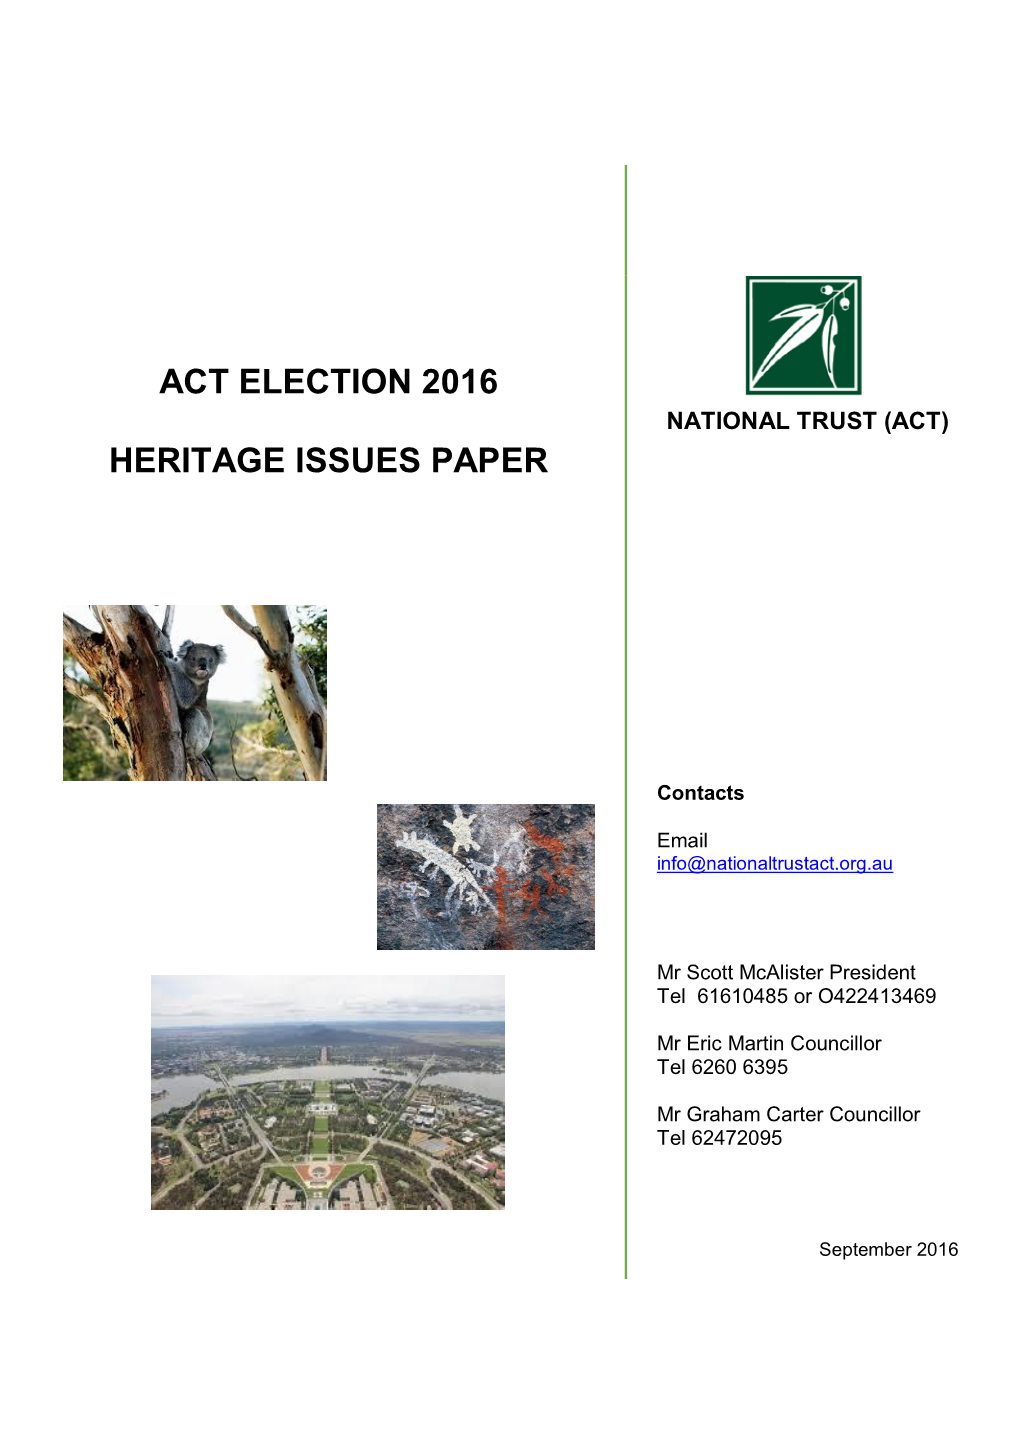 Act Election 2016 Heritage Issues Paper